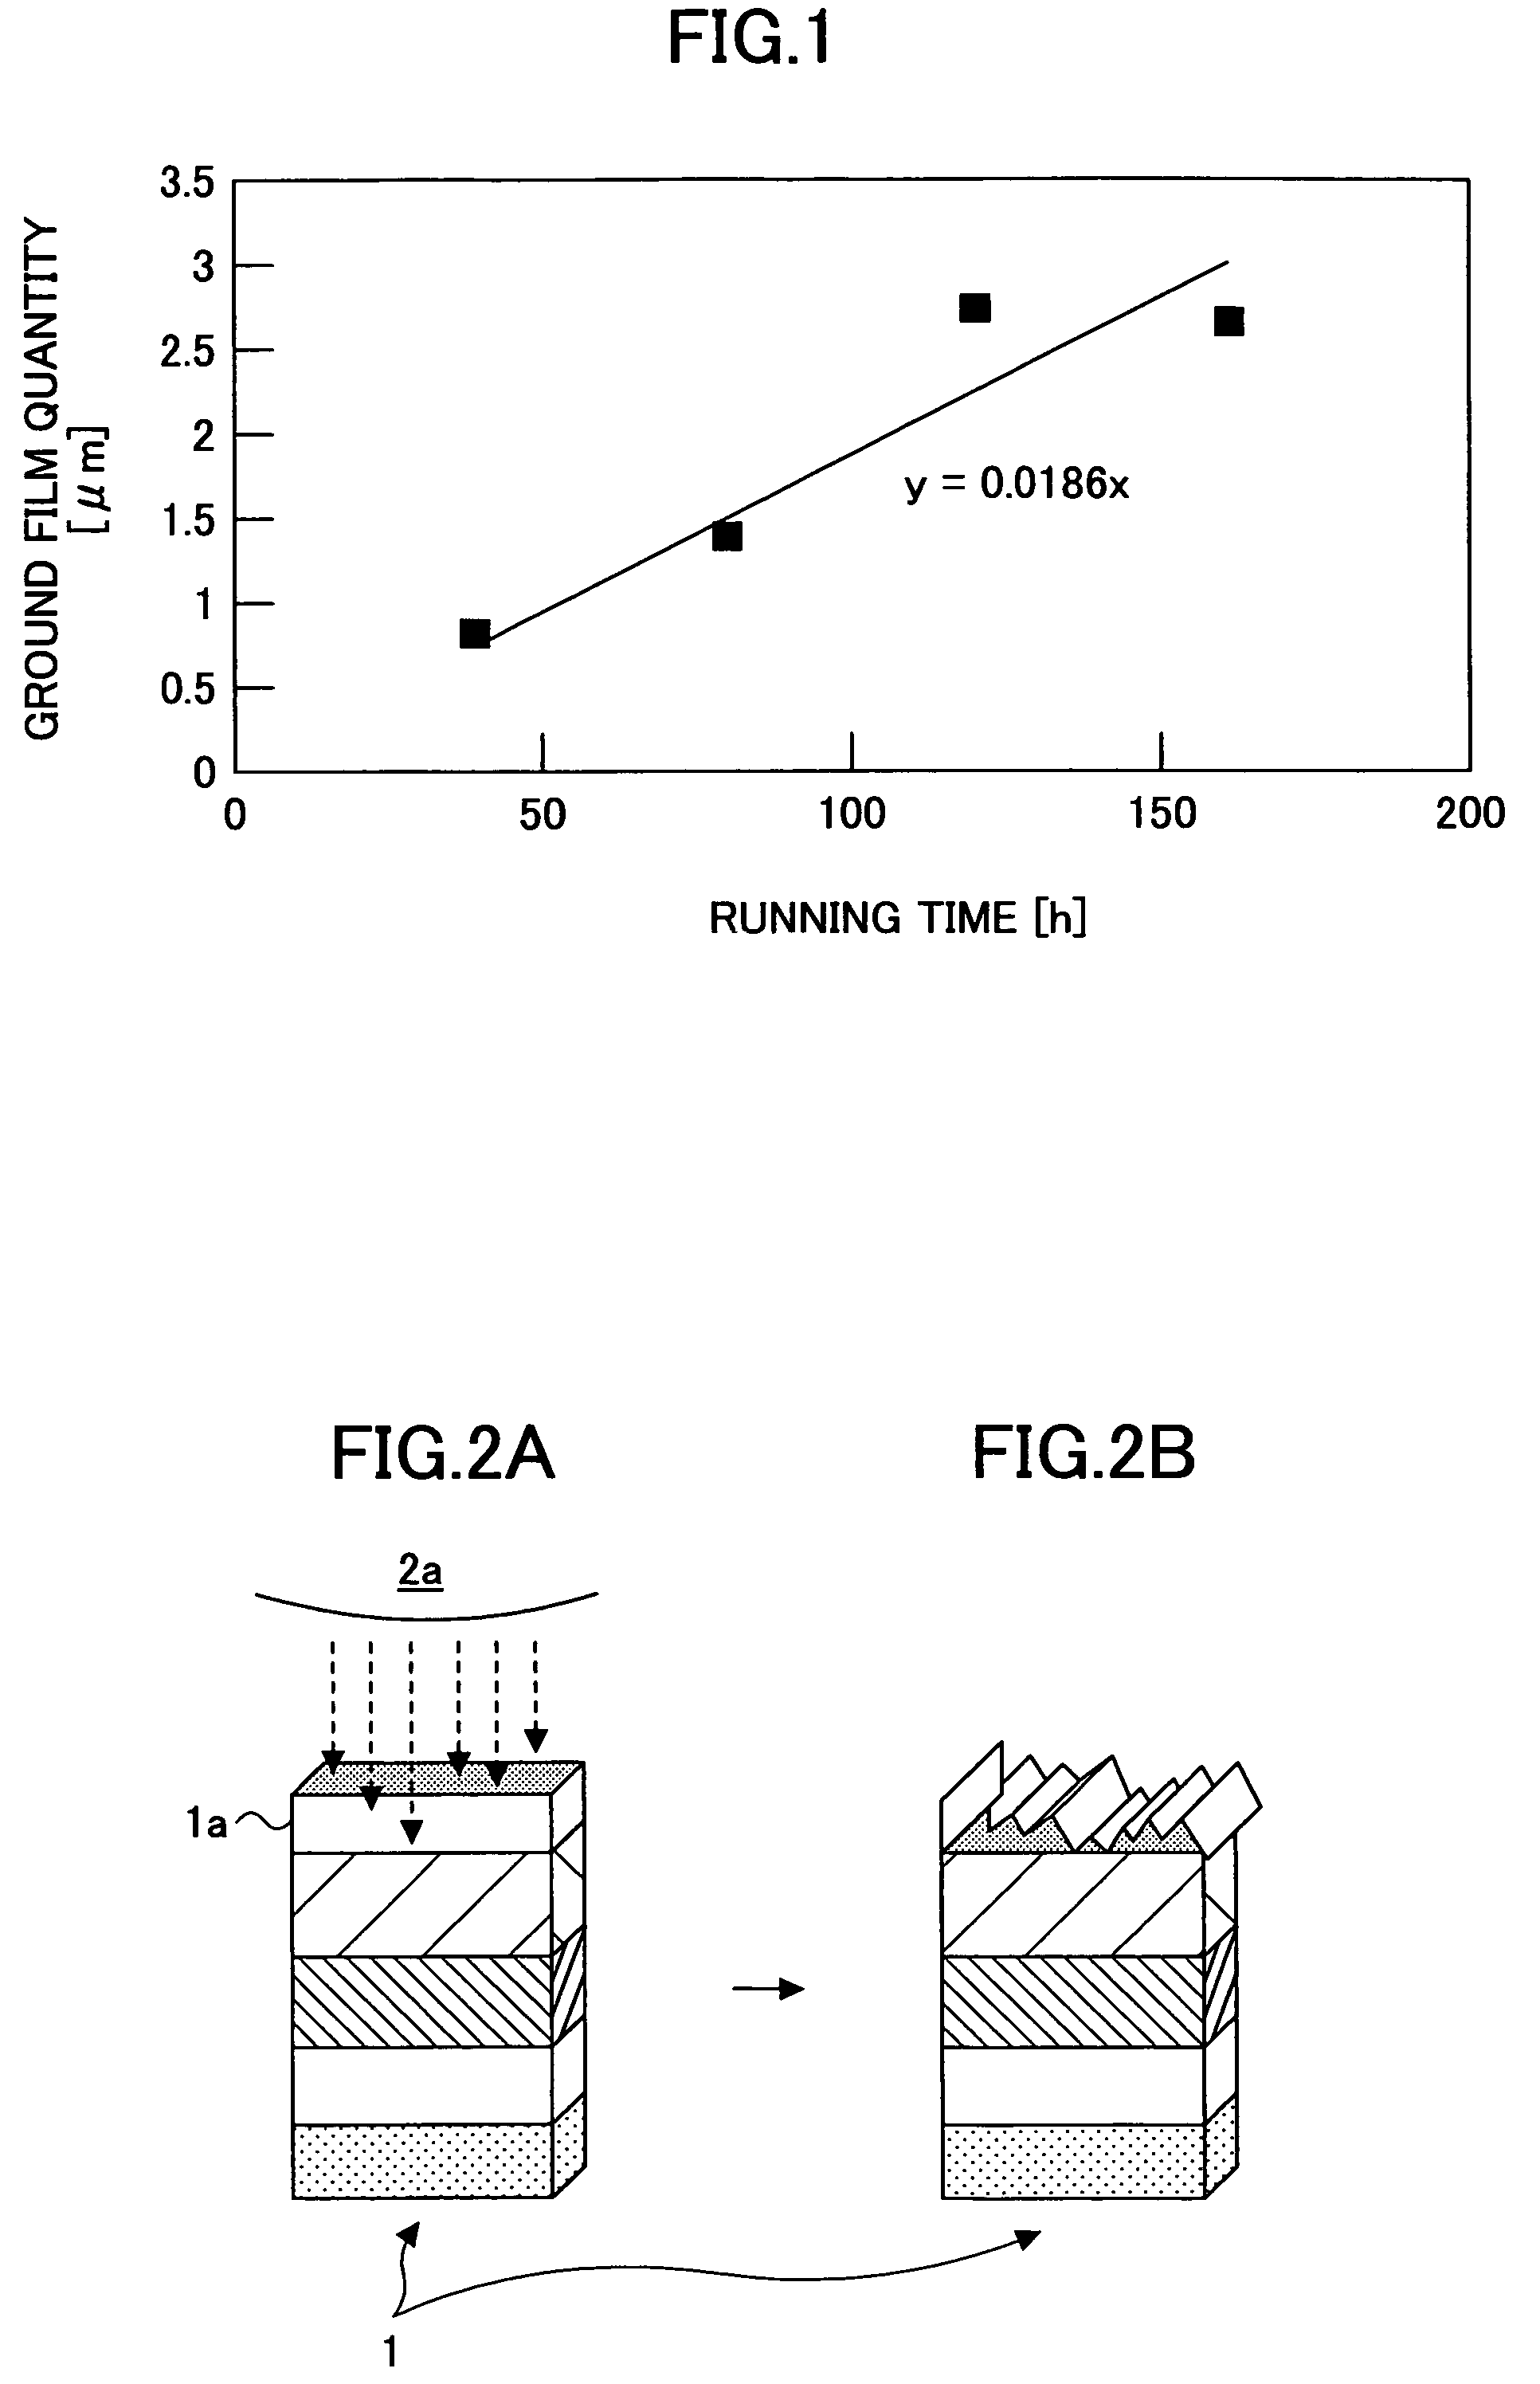 Image formation apparatus having a body to be charged with specified properties and including the use of a protective material